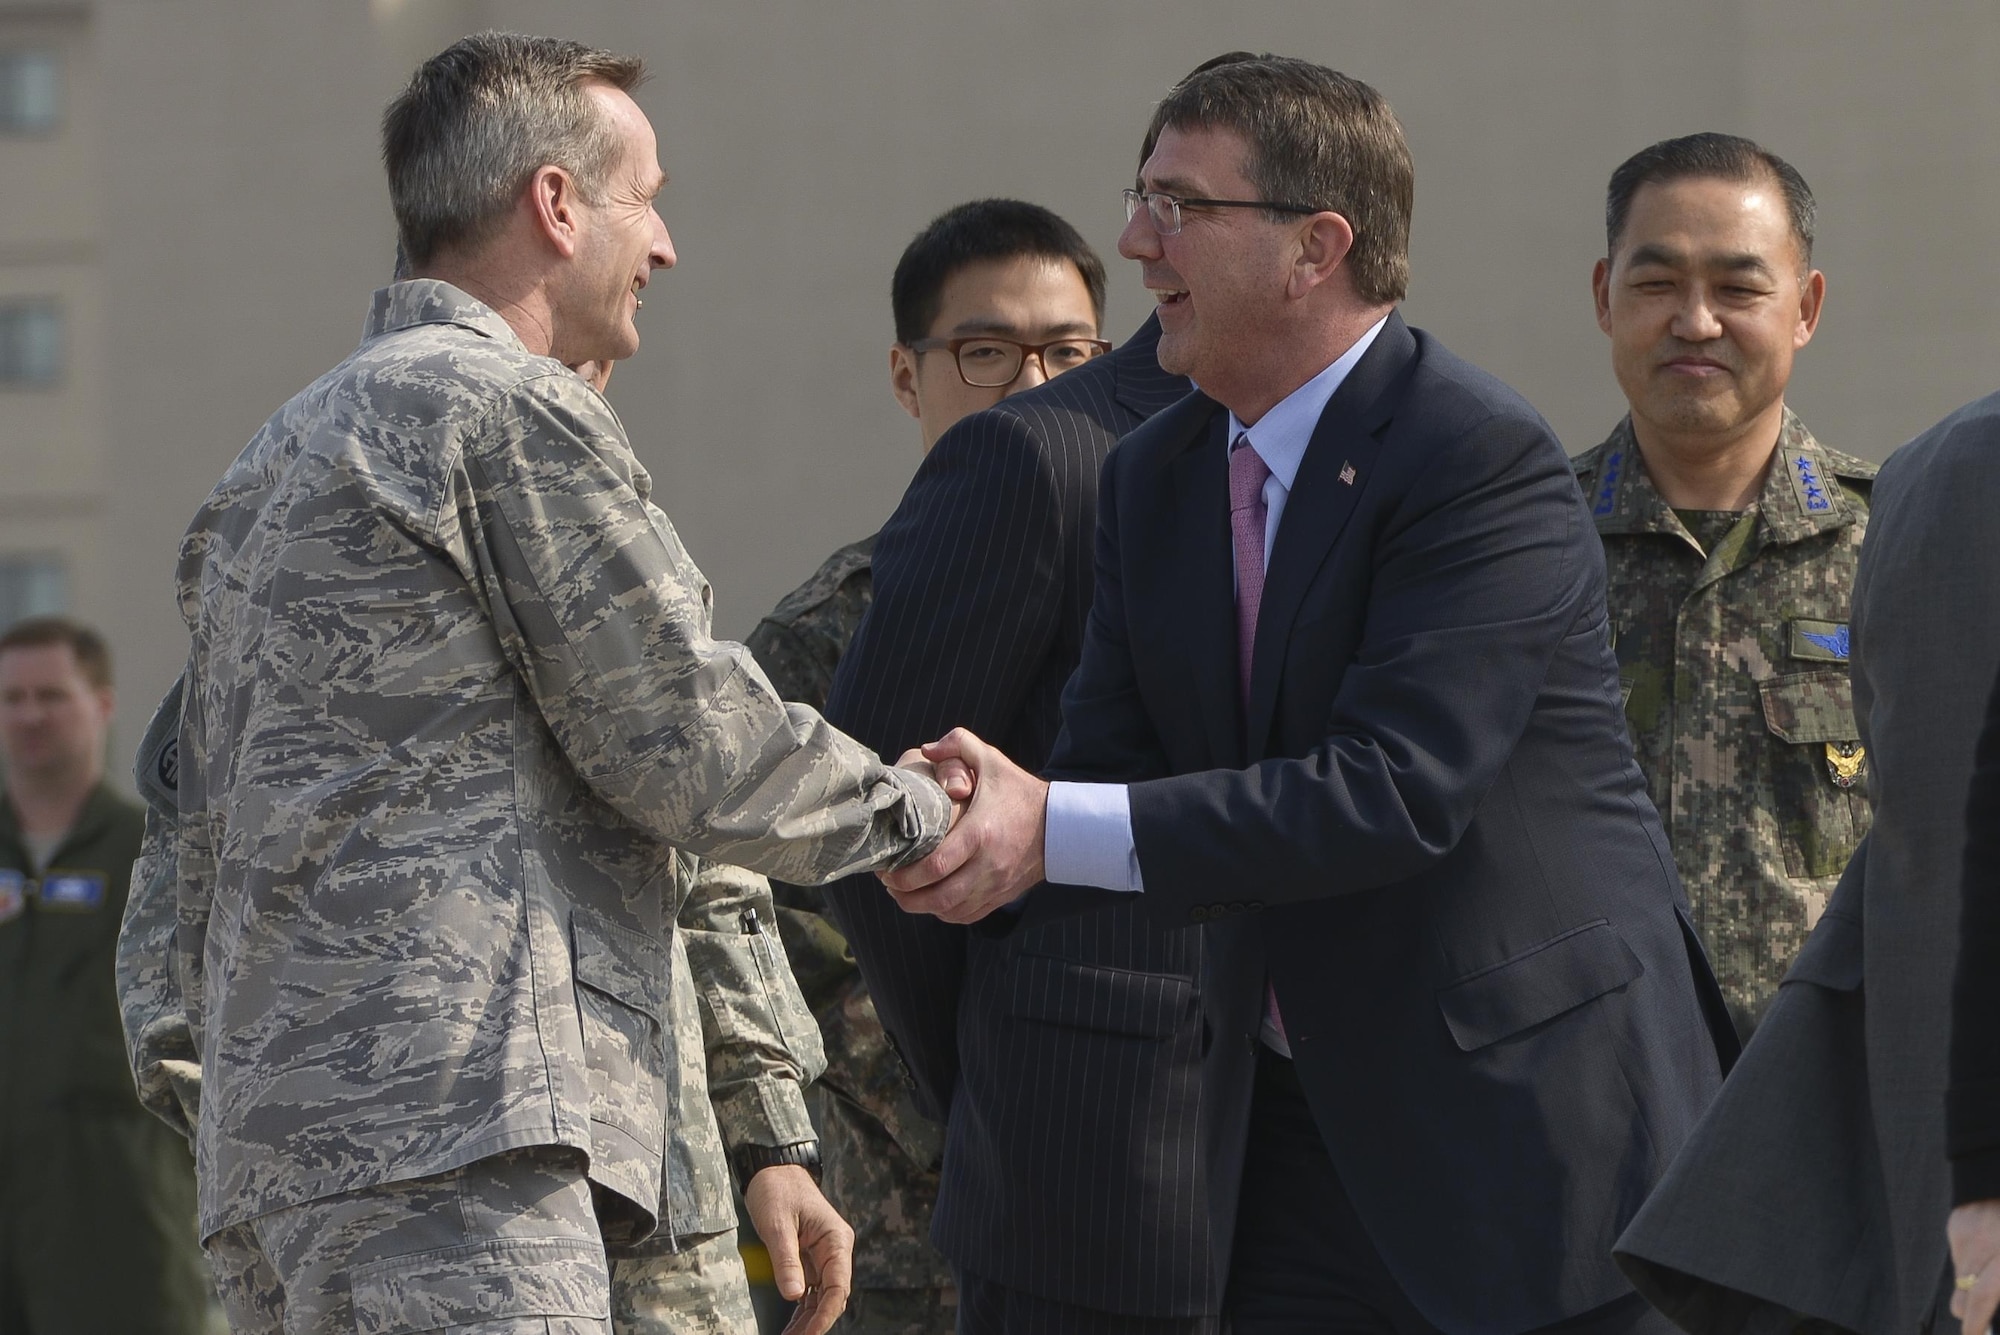 Secretary of Defense Ash Carter is greeted by Lt. Gen. Terrence O'Shaugnessy April 9, 2015, at Osan Air Base, South Korea. Carter was greeted by multiple Air Force, Army, and South Korean leaders when he arrived at the Osan AB. (U.S. Air Force photo/Staff Sgt. Jake Barreiro)